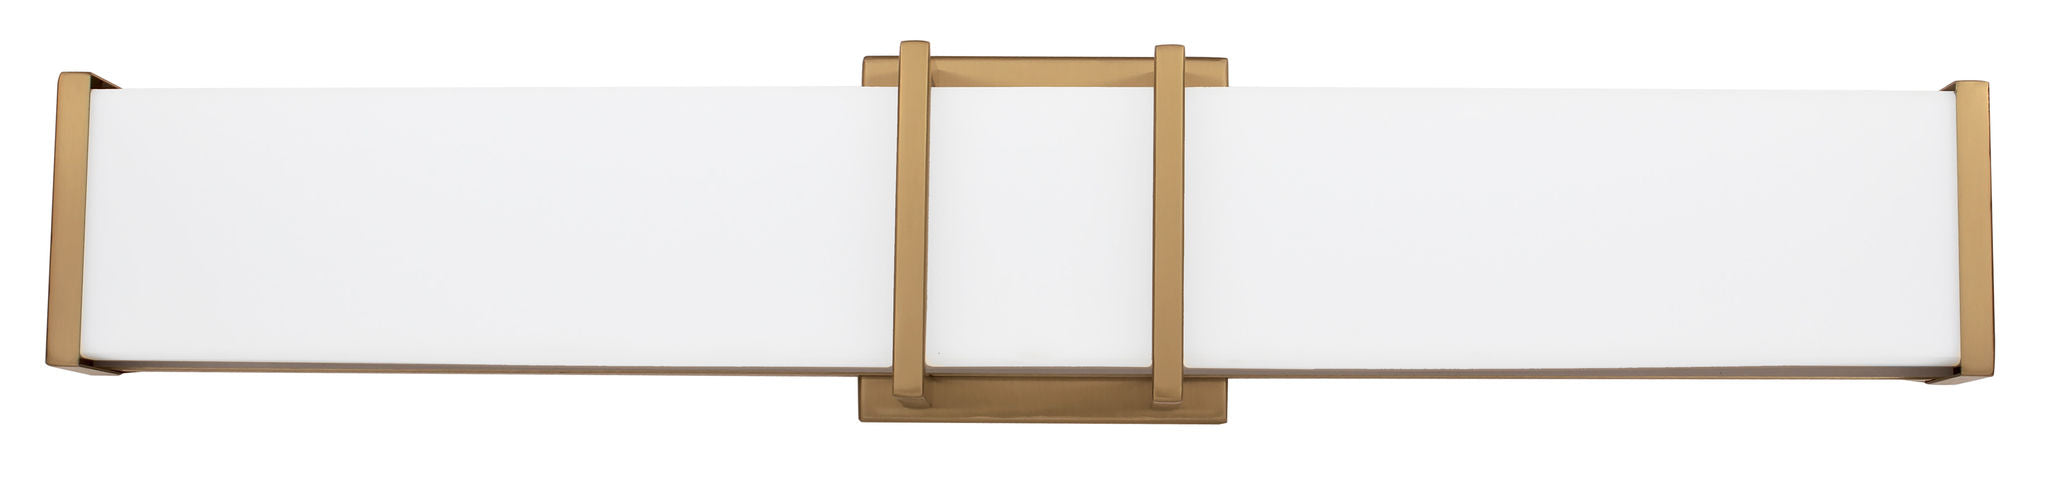 Tomero Sconce Gold INTEGRATED LED - 204126A | EGLO